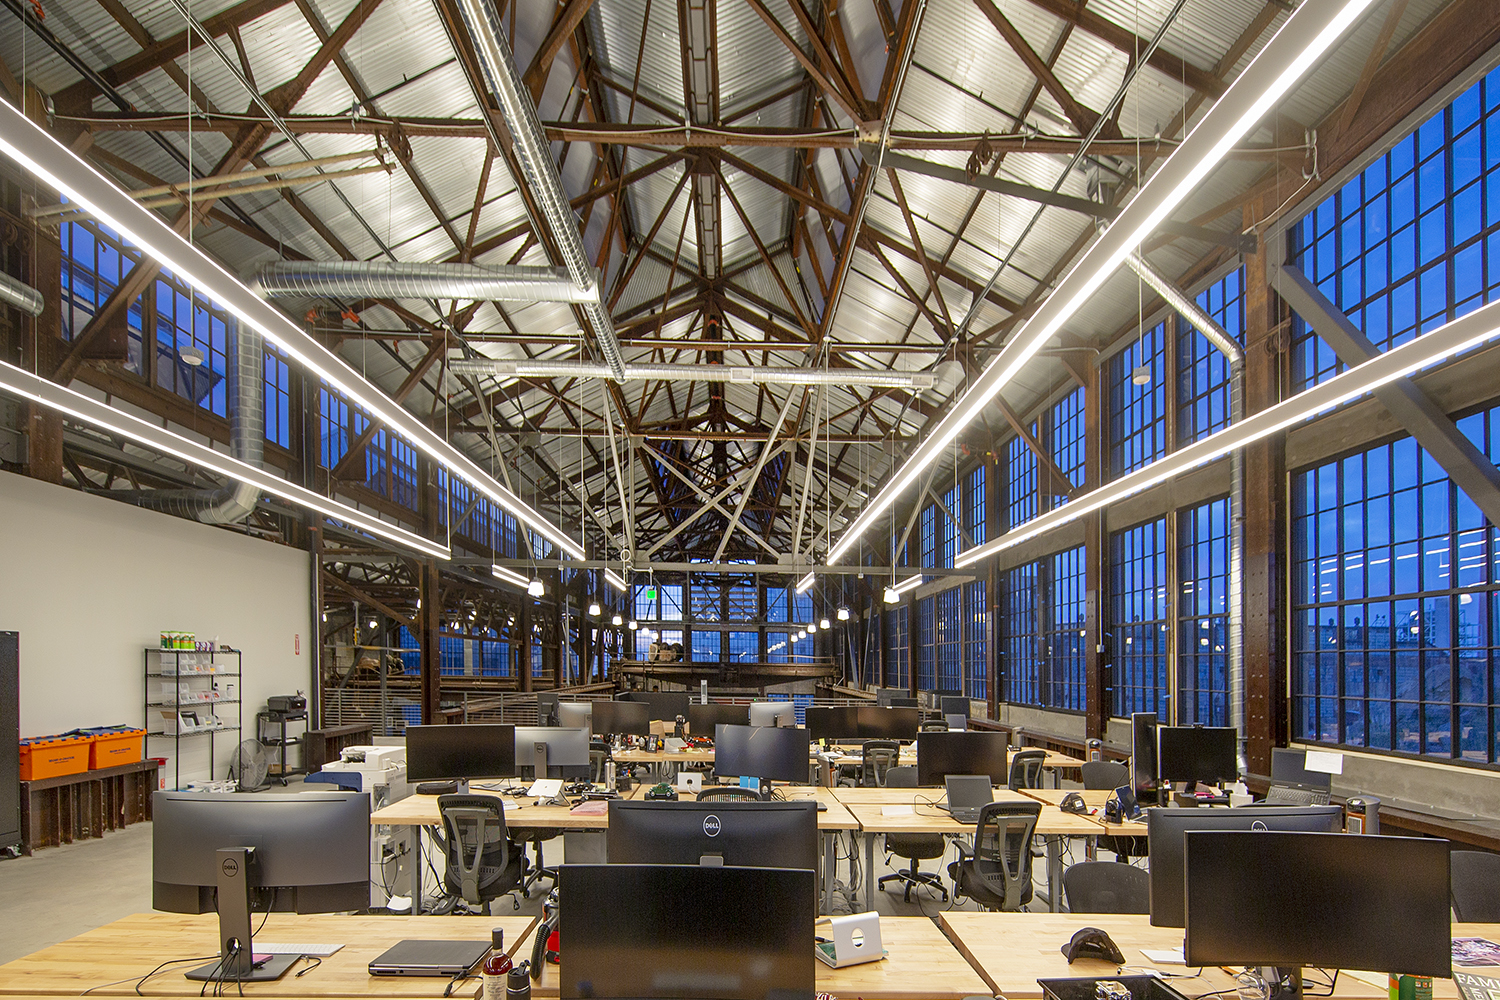 06_Projects_Adaptive Reuse of Historic Pier 70.jpg